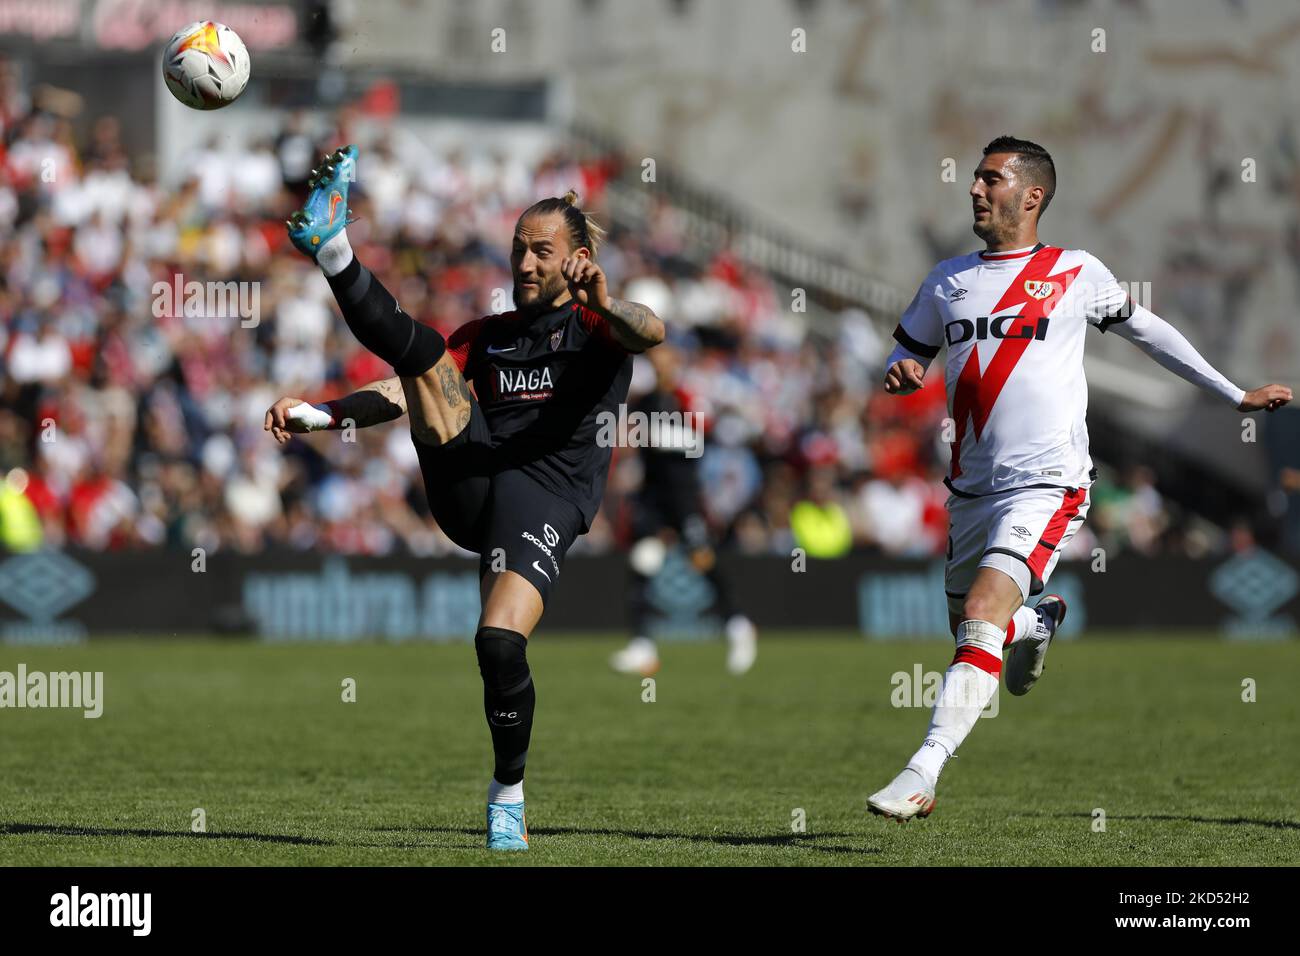 <s3 during the Liga match between Rayo Vallecano and Sevilla FC at Estadio de Vallecas in Barcelona, Spain. (Photo by DAX Images/NurPhoto) Stock Photo